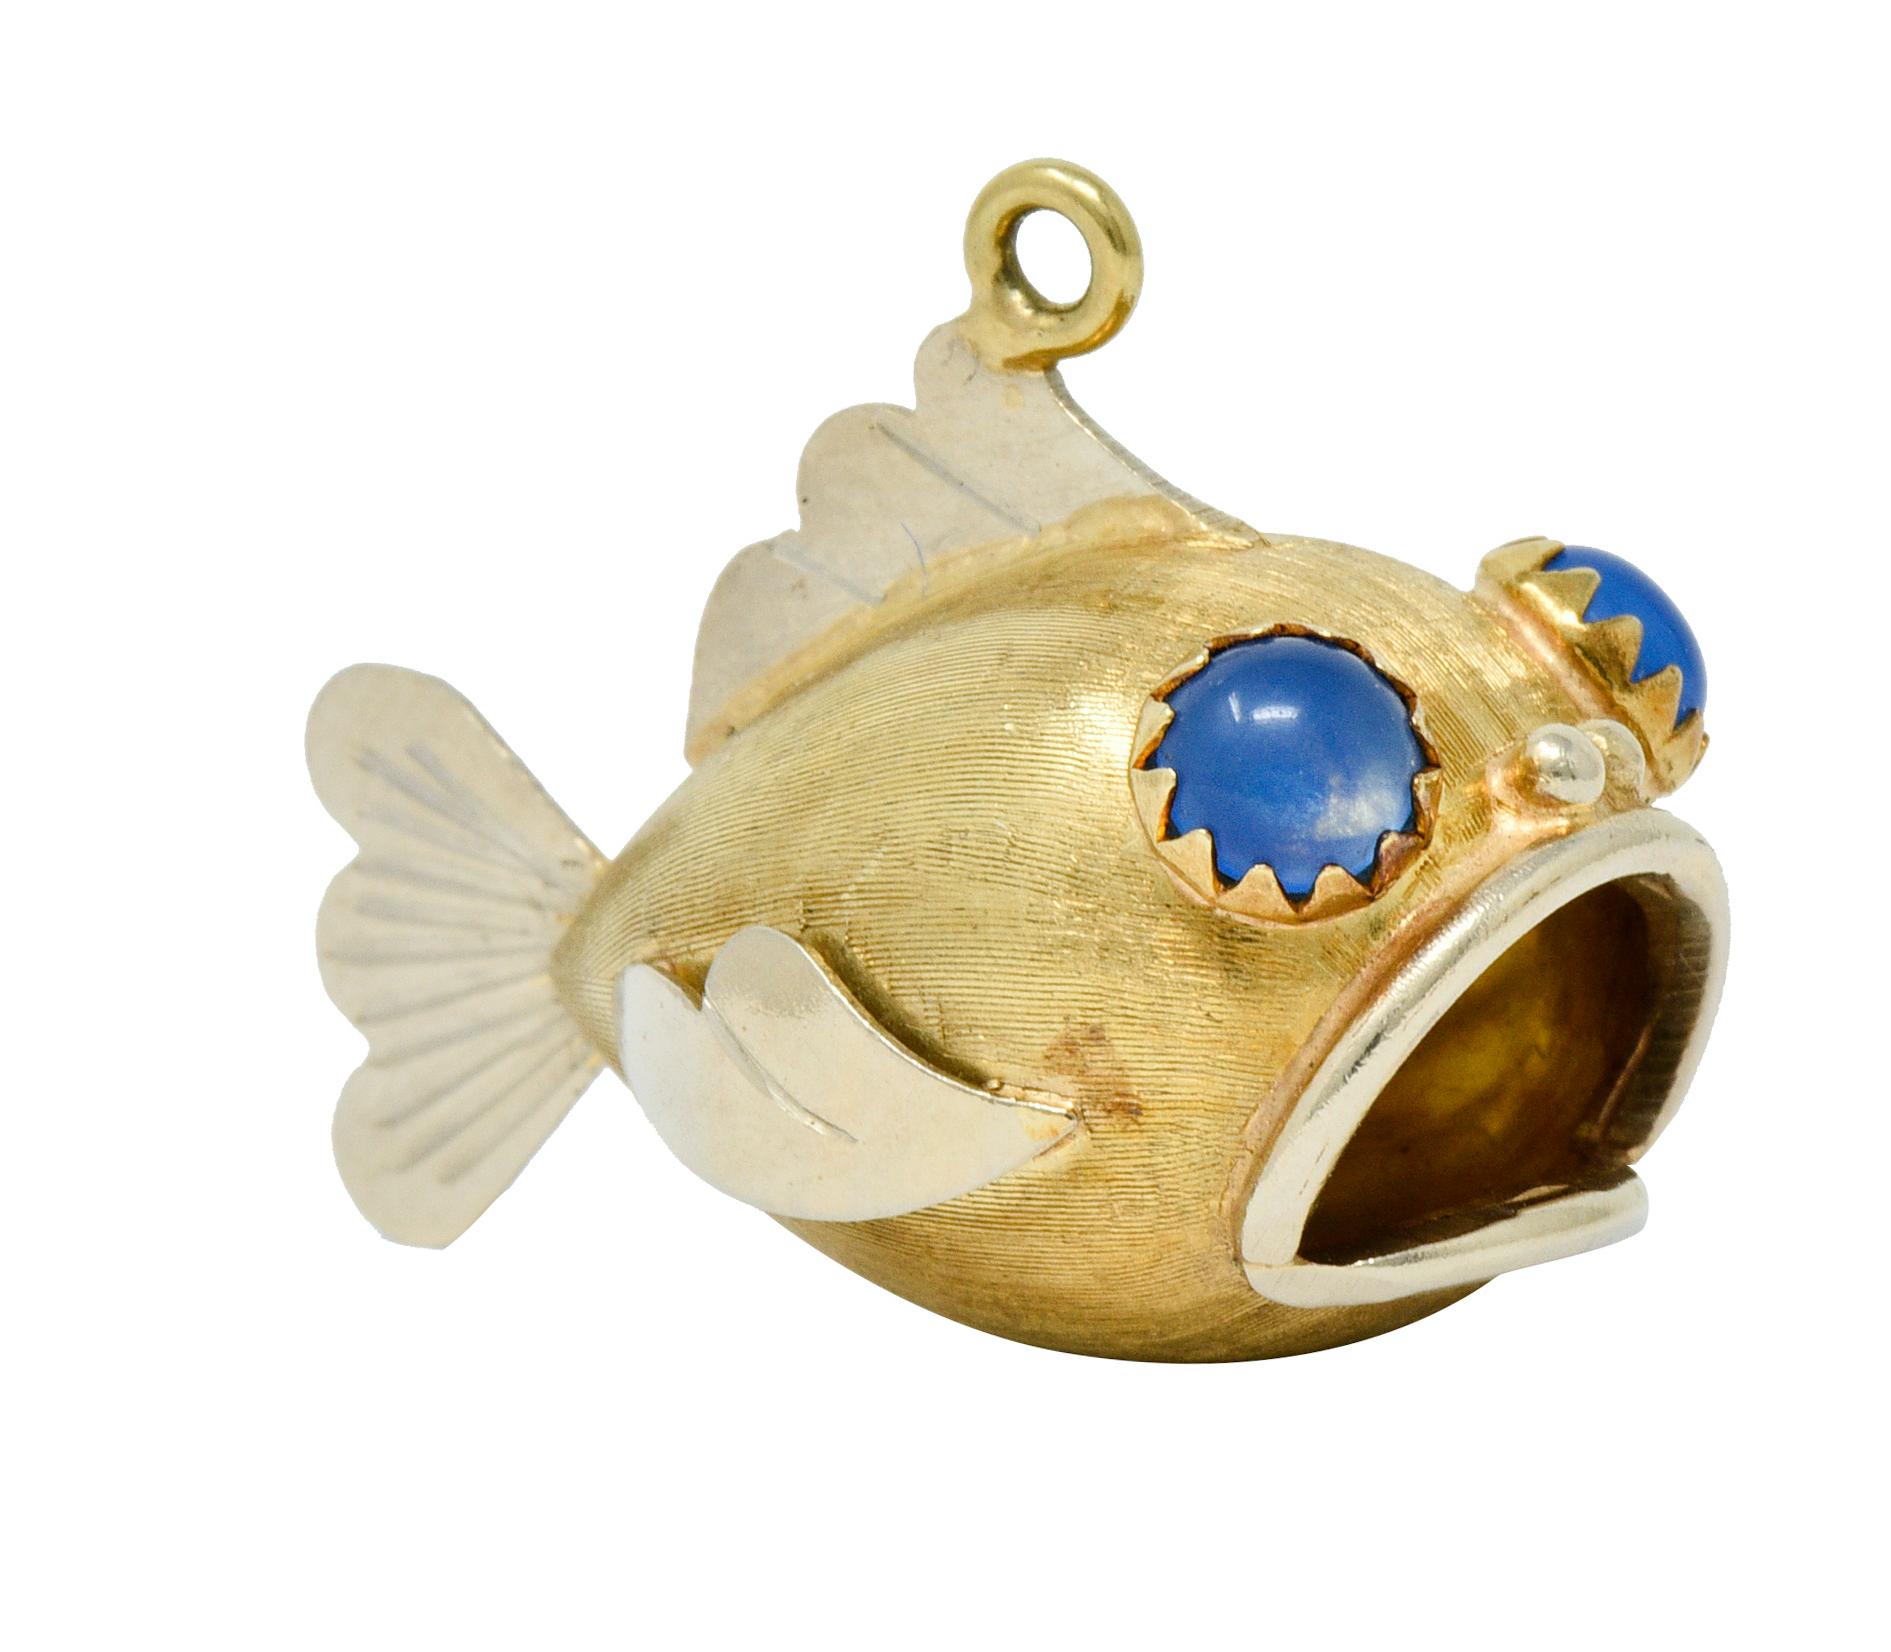 Fish charm is designed with an open mouth revealing the open cavity of its stomach

With cartoonish white gold features and a strongly brushed yellow gold body

Featuring 5.0 mm round glass cabochon eyes; bright translucent blue in color

Tested as